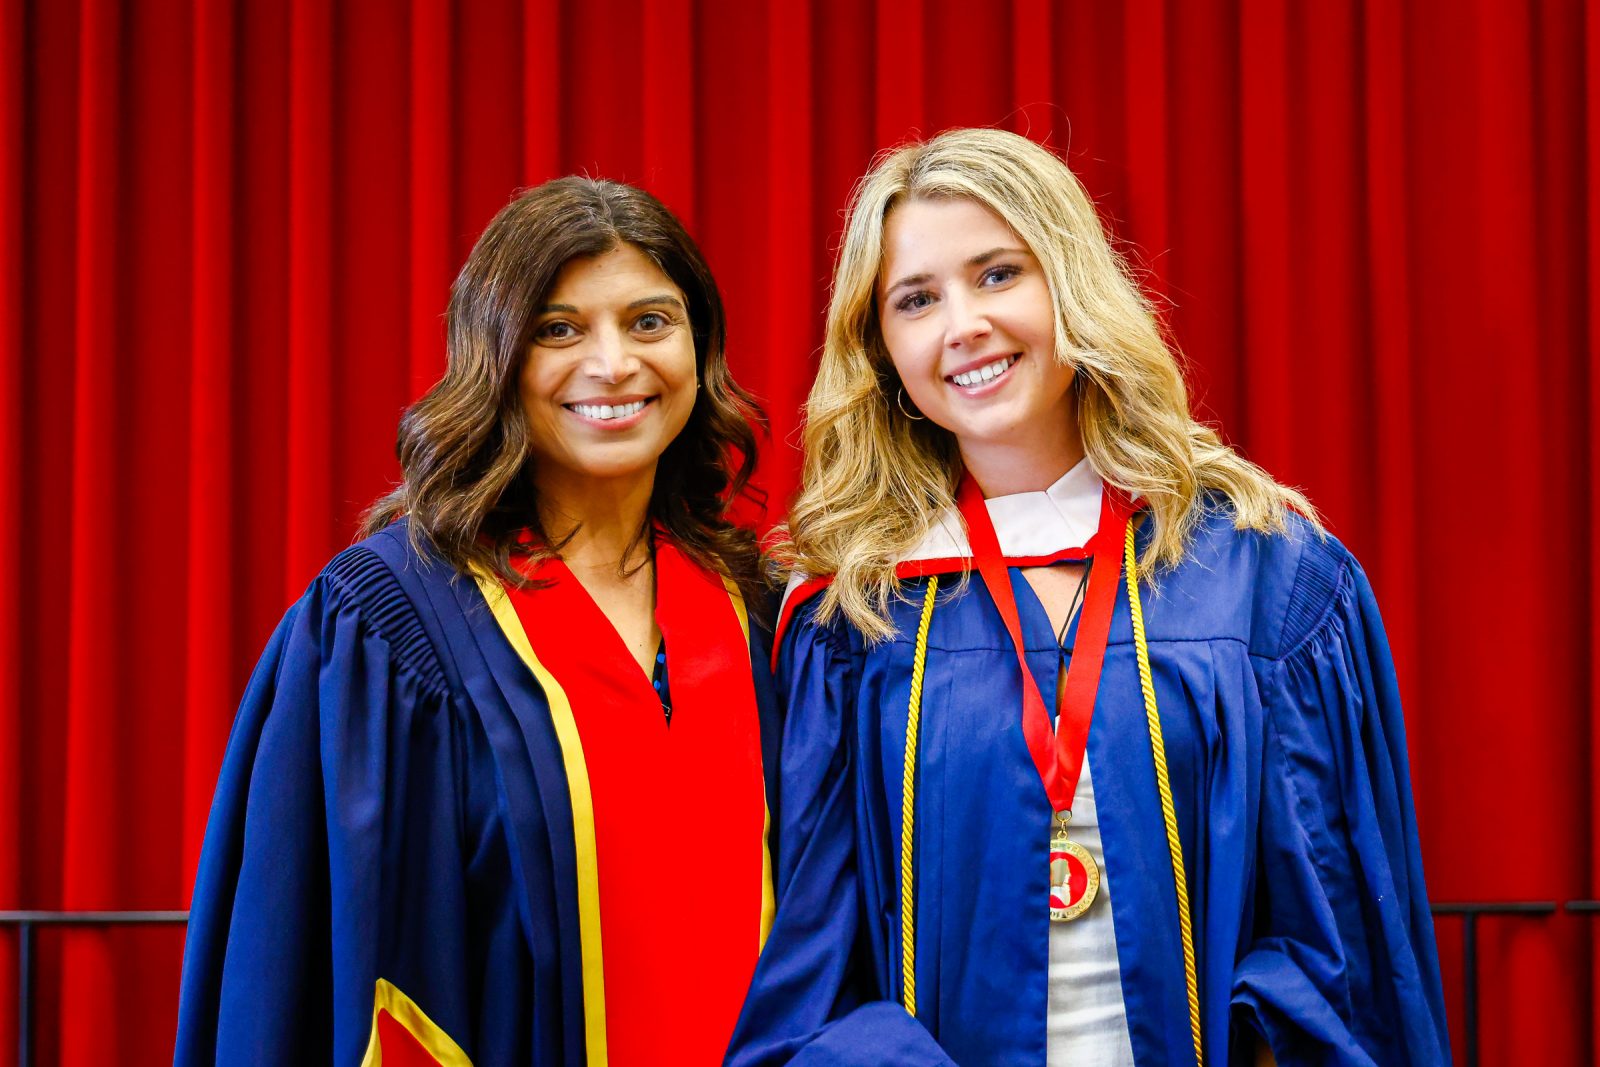 Two women stand side-by-side in academic robes.